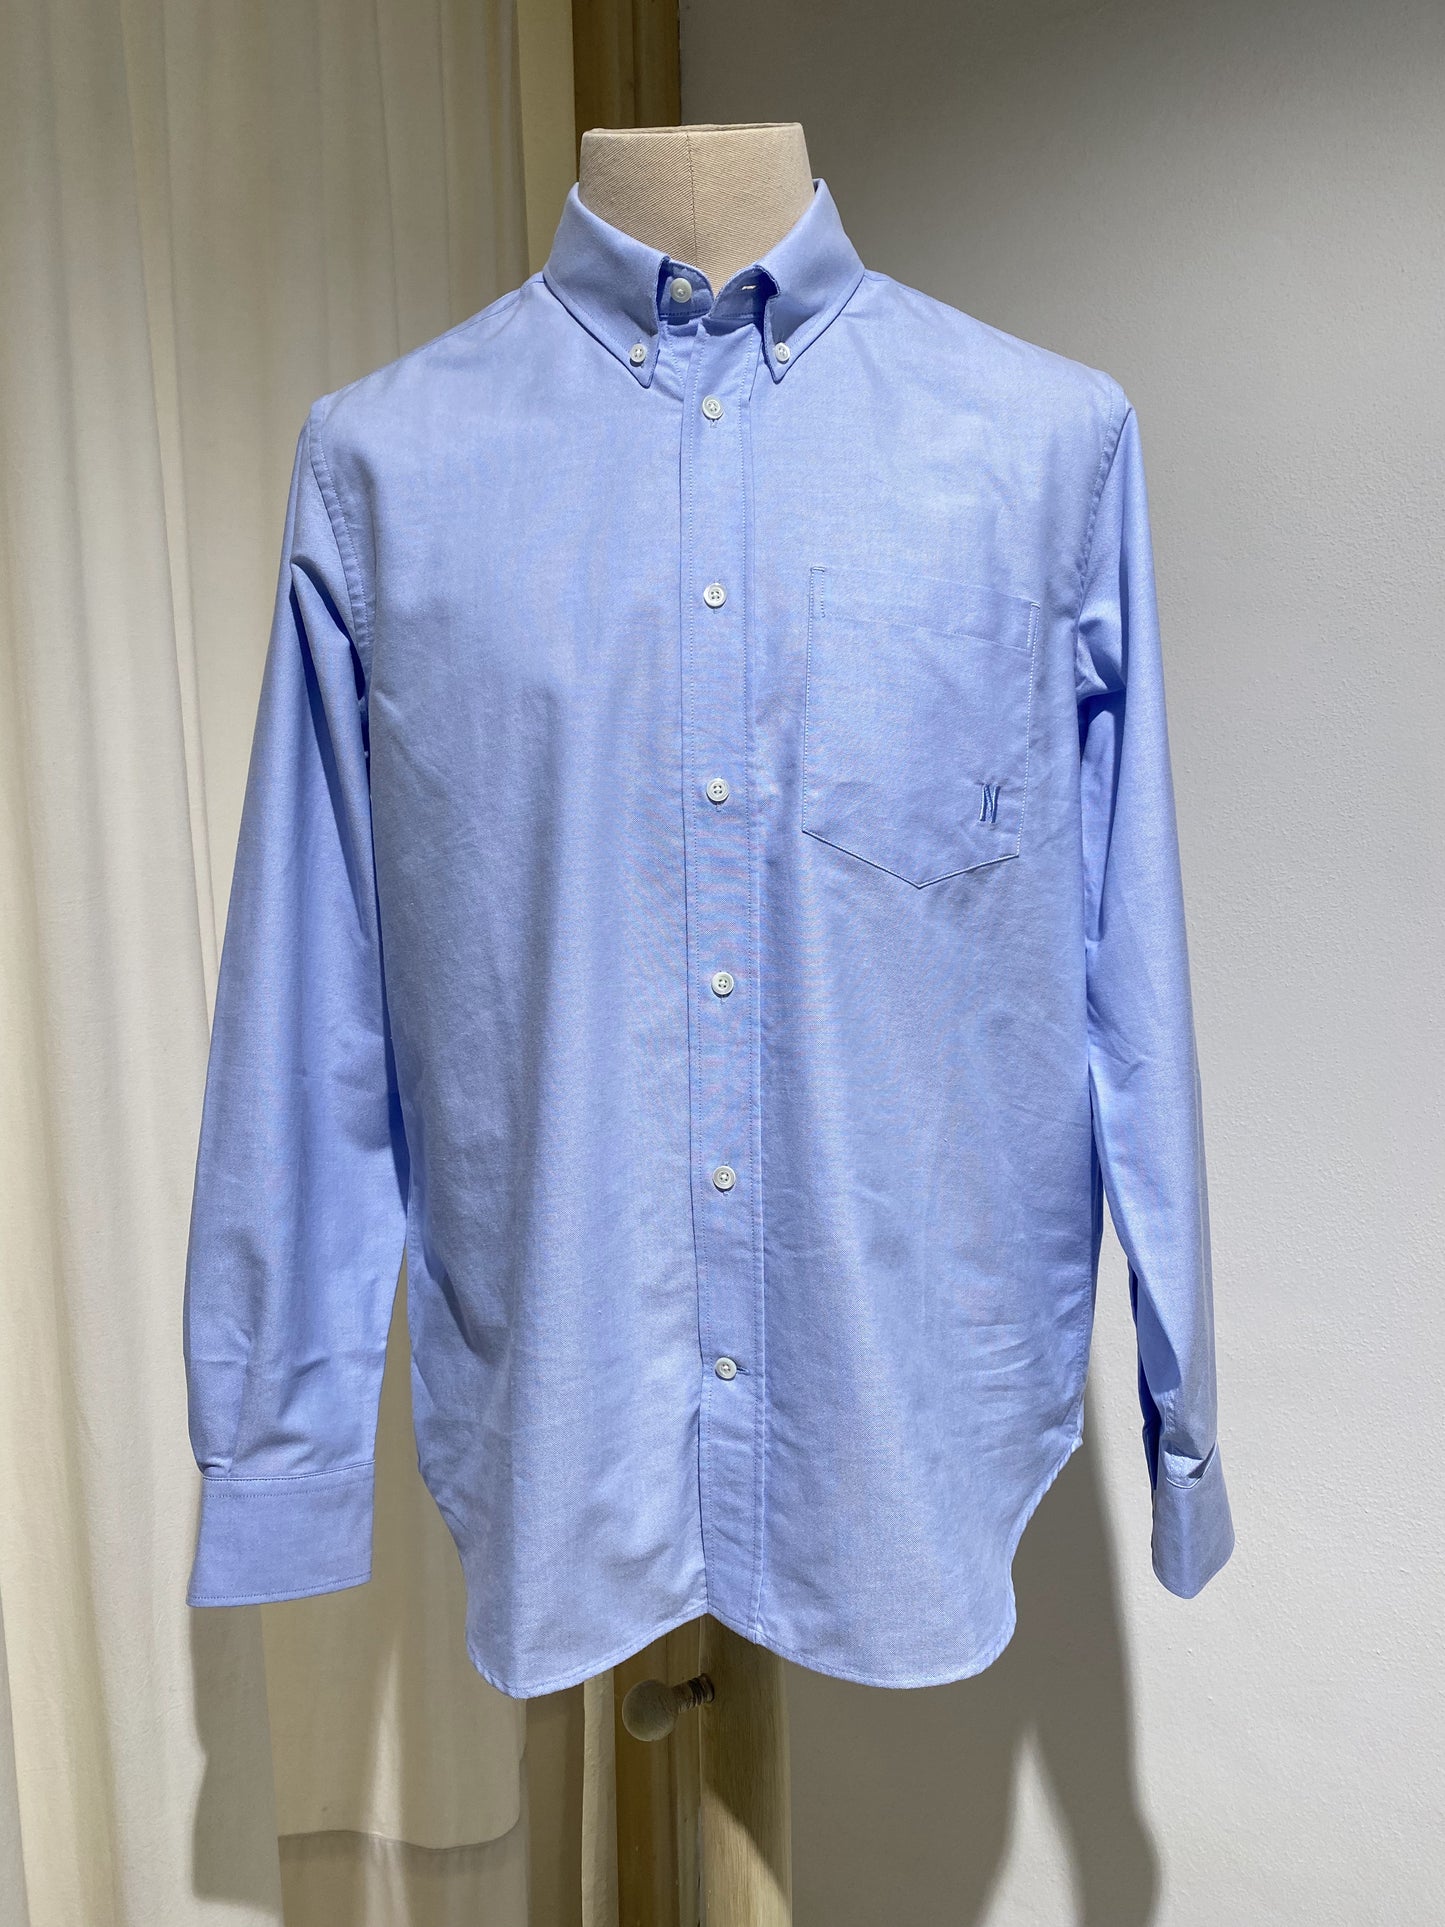 M BOTTON DOWN SHIRT NORSE PROJECTS SKY BLUE